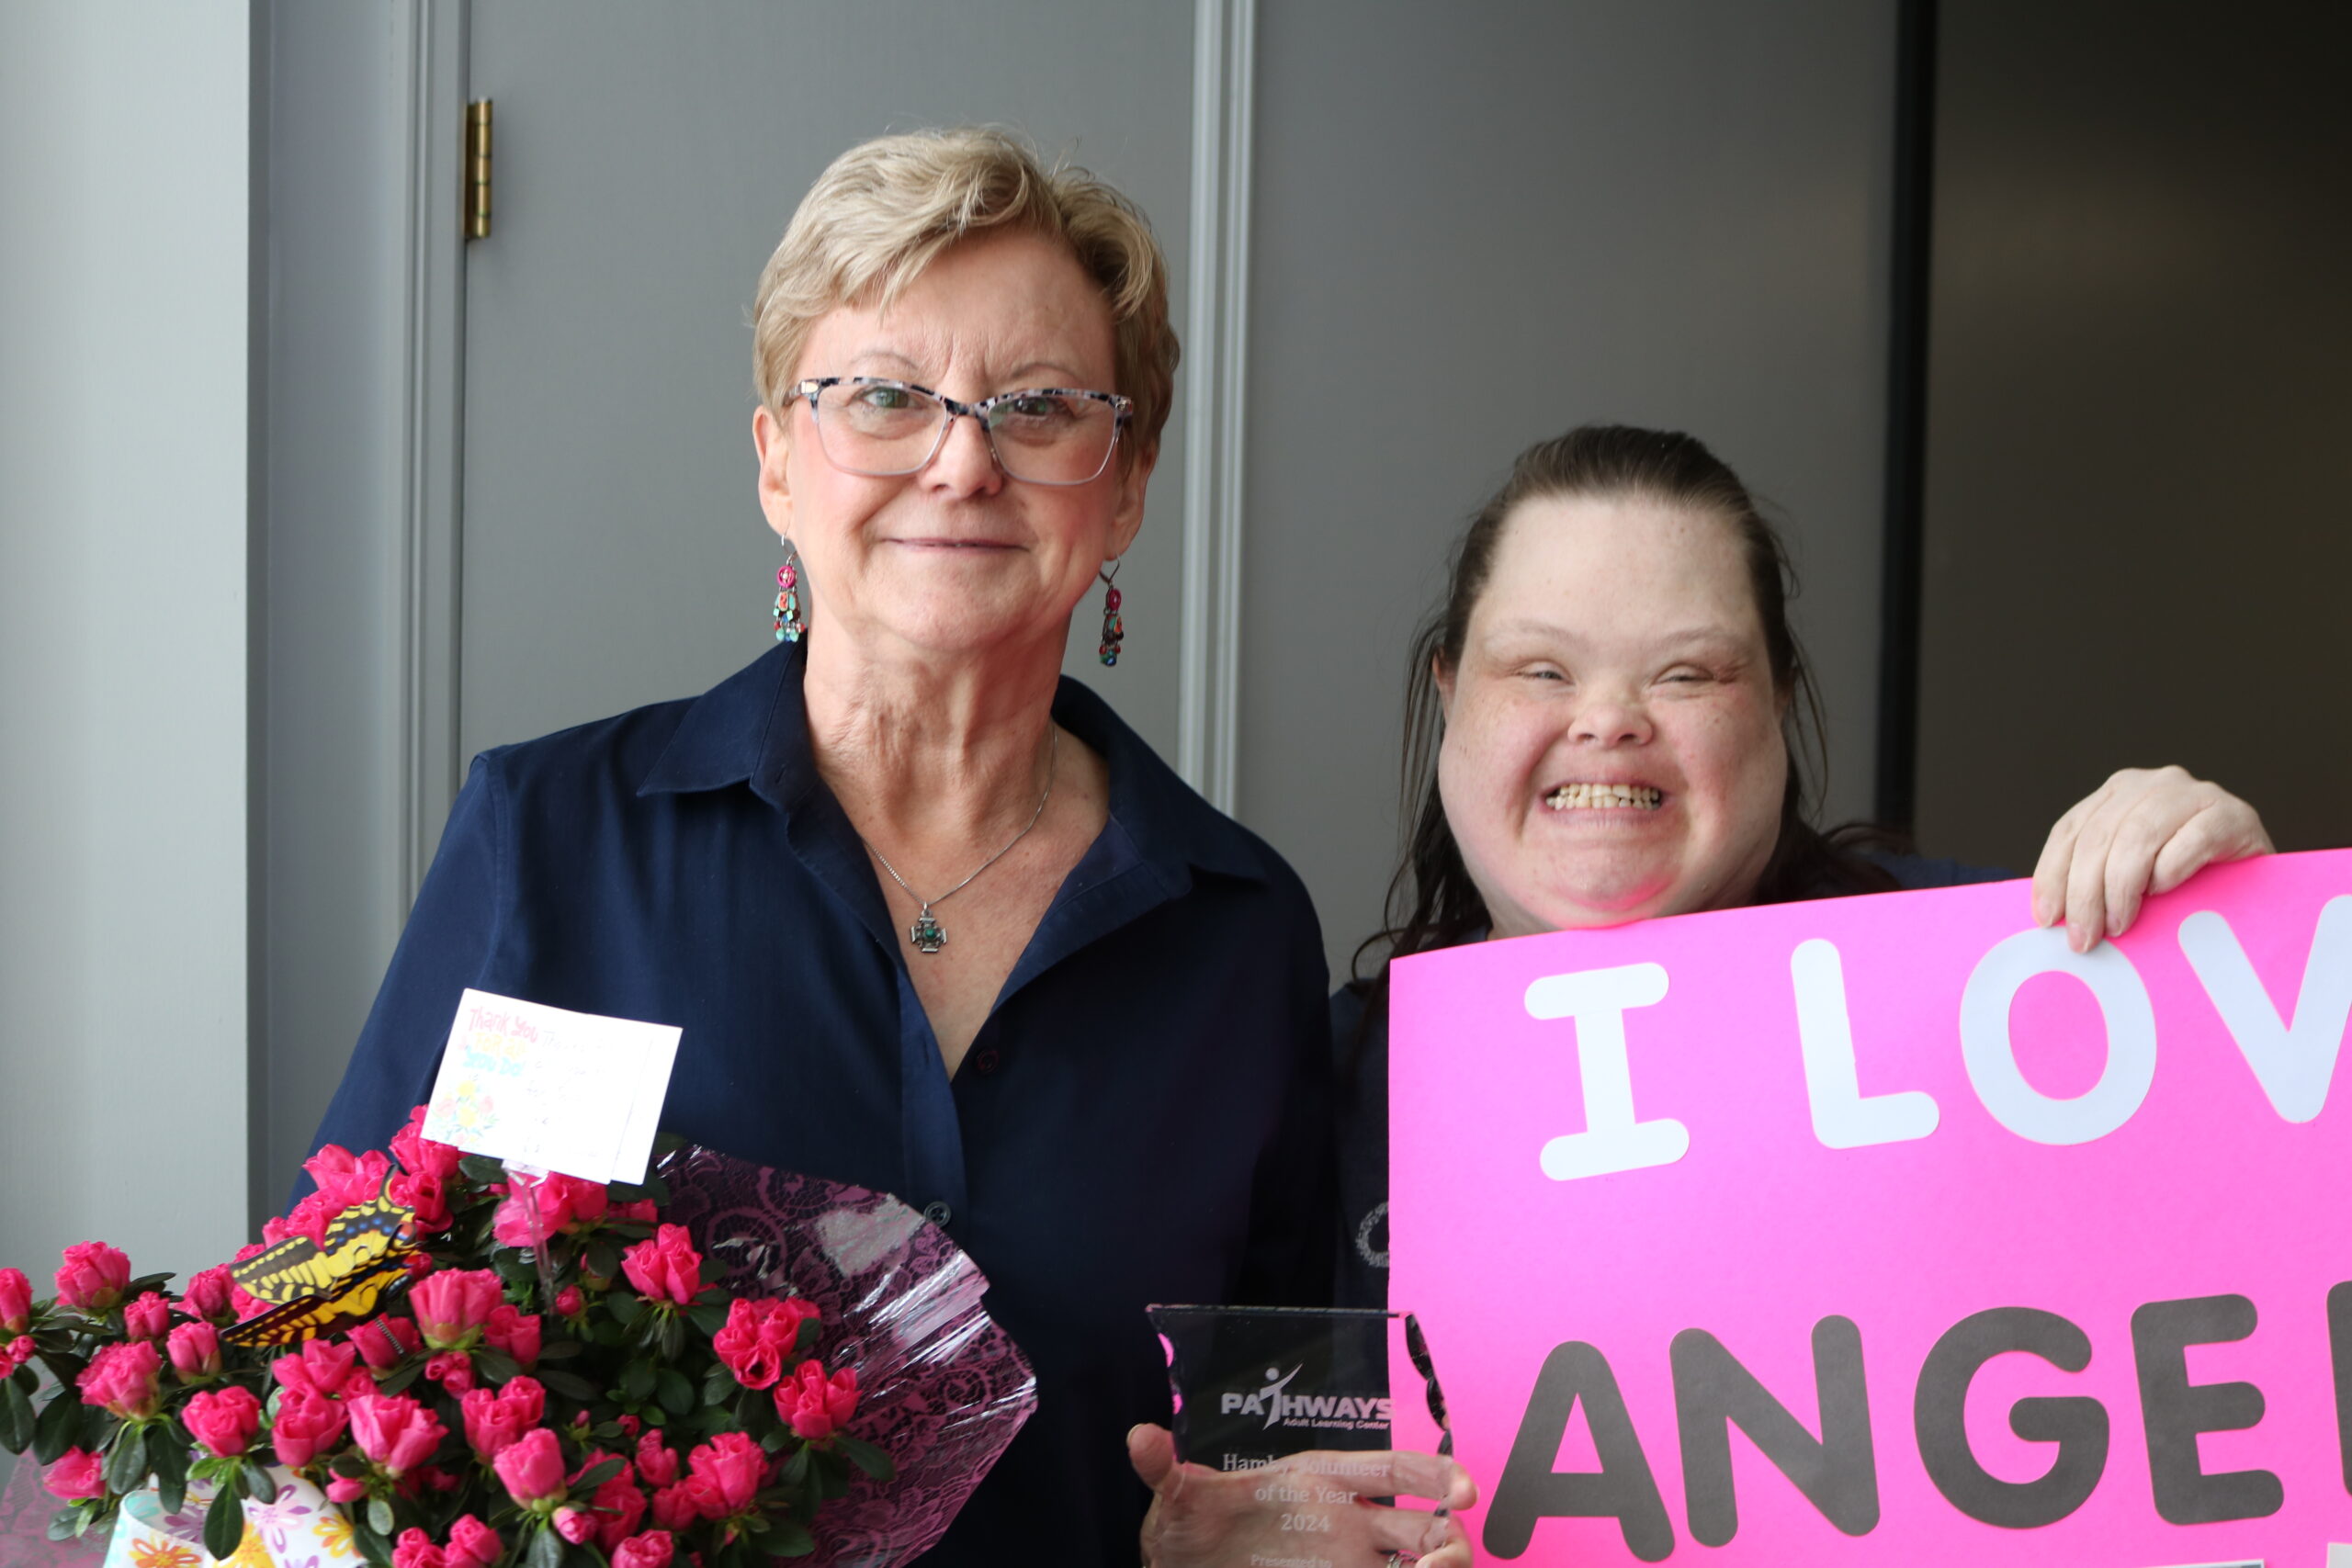 Our student Angela, pictured with our Volunteer of the Year, Sara - who is holding a bouquet of flowers and an award.